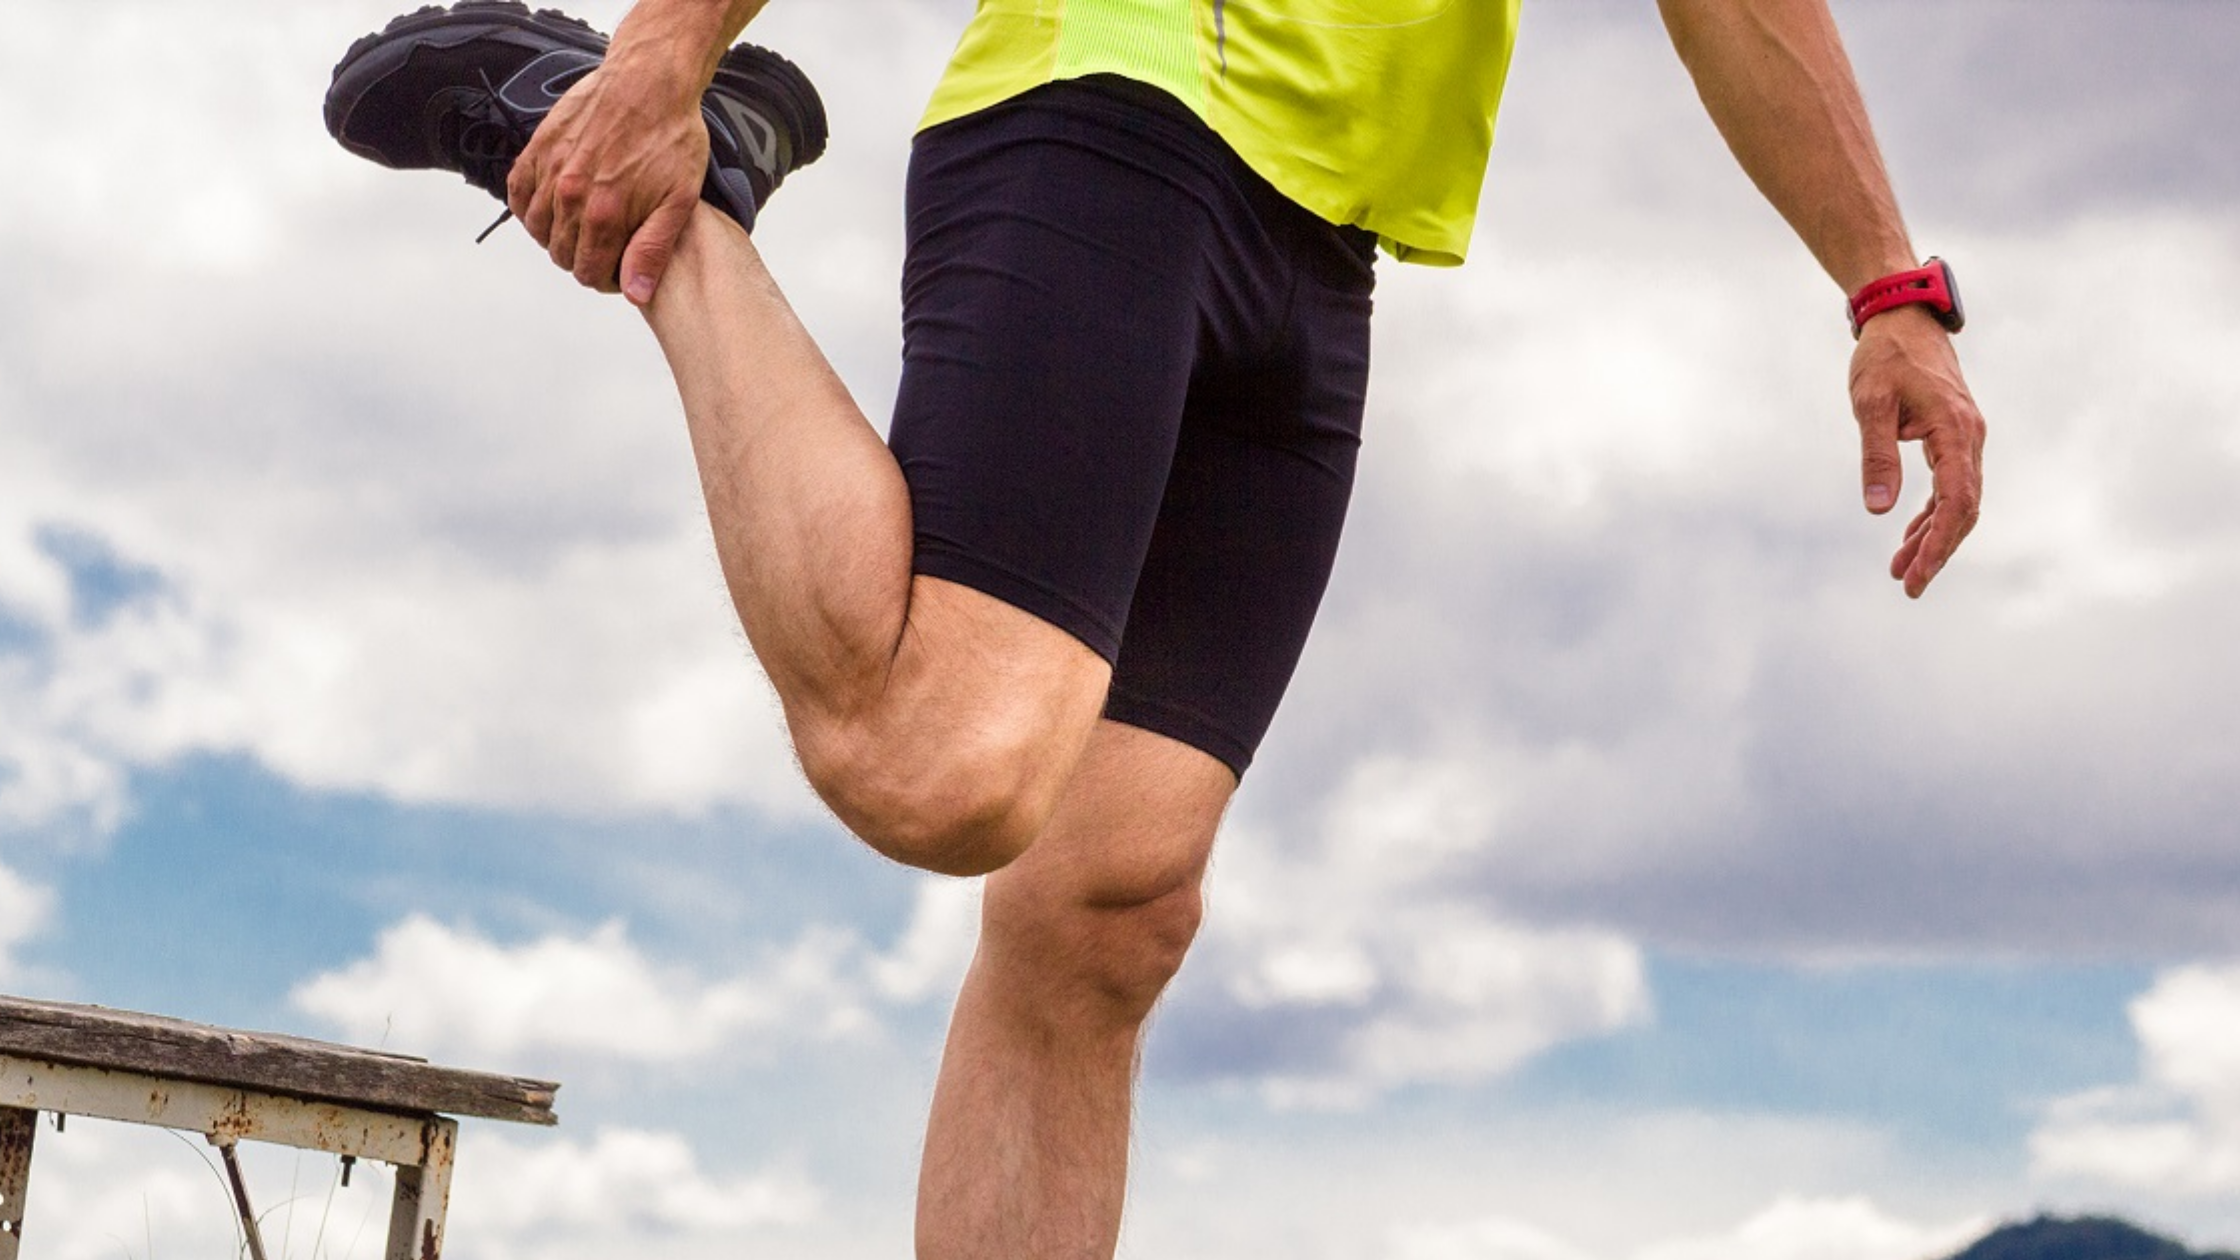 Can stretching prevent foot pain?